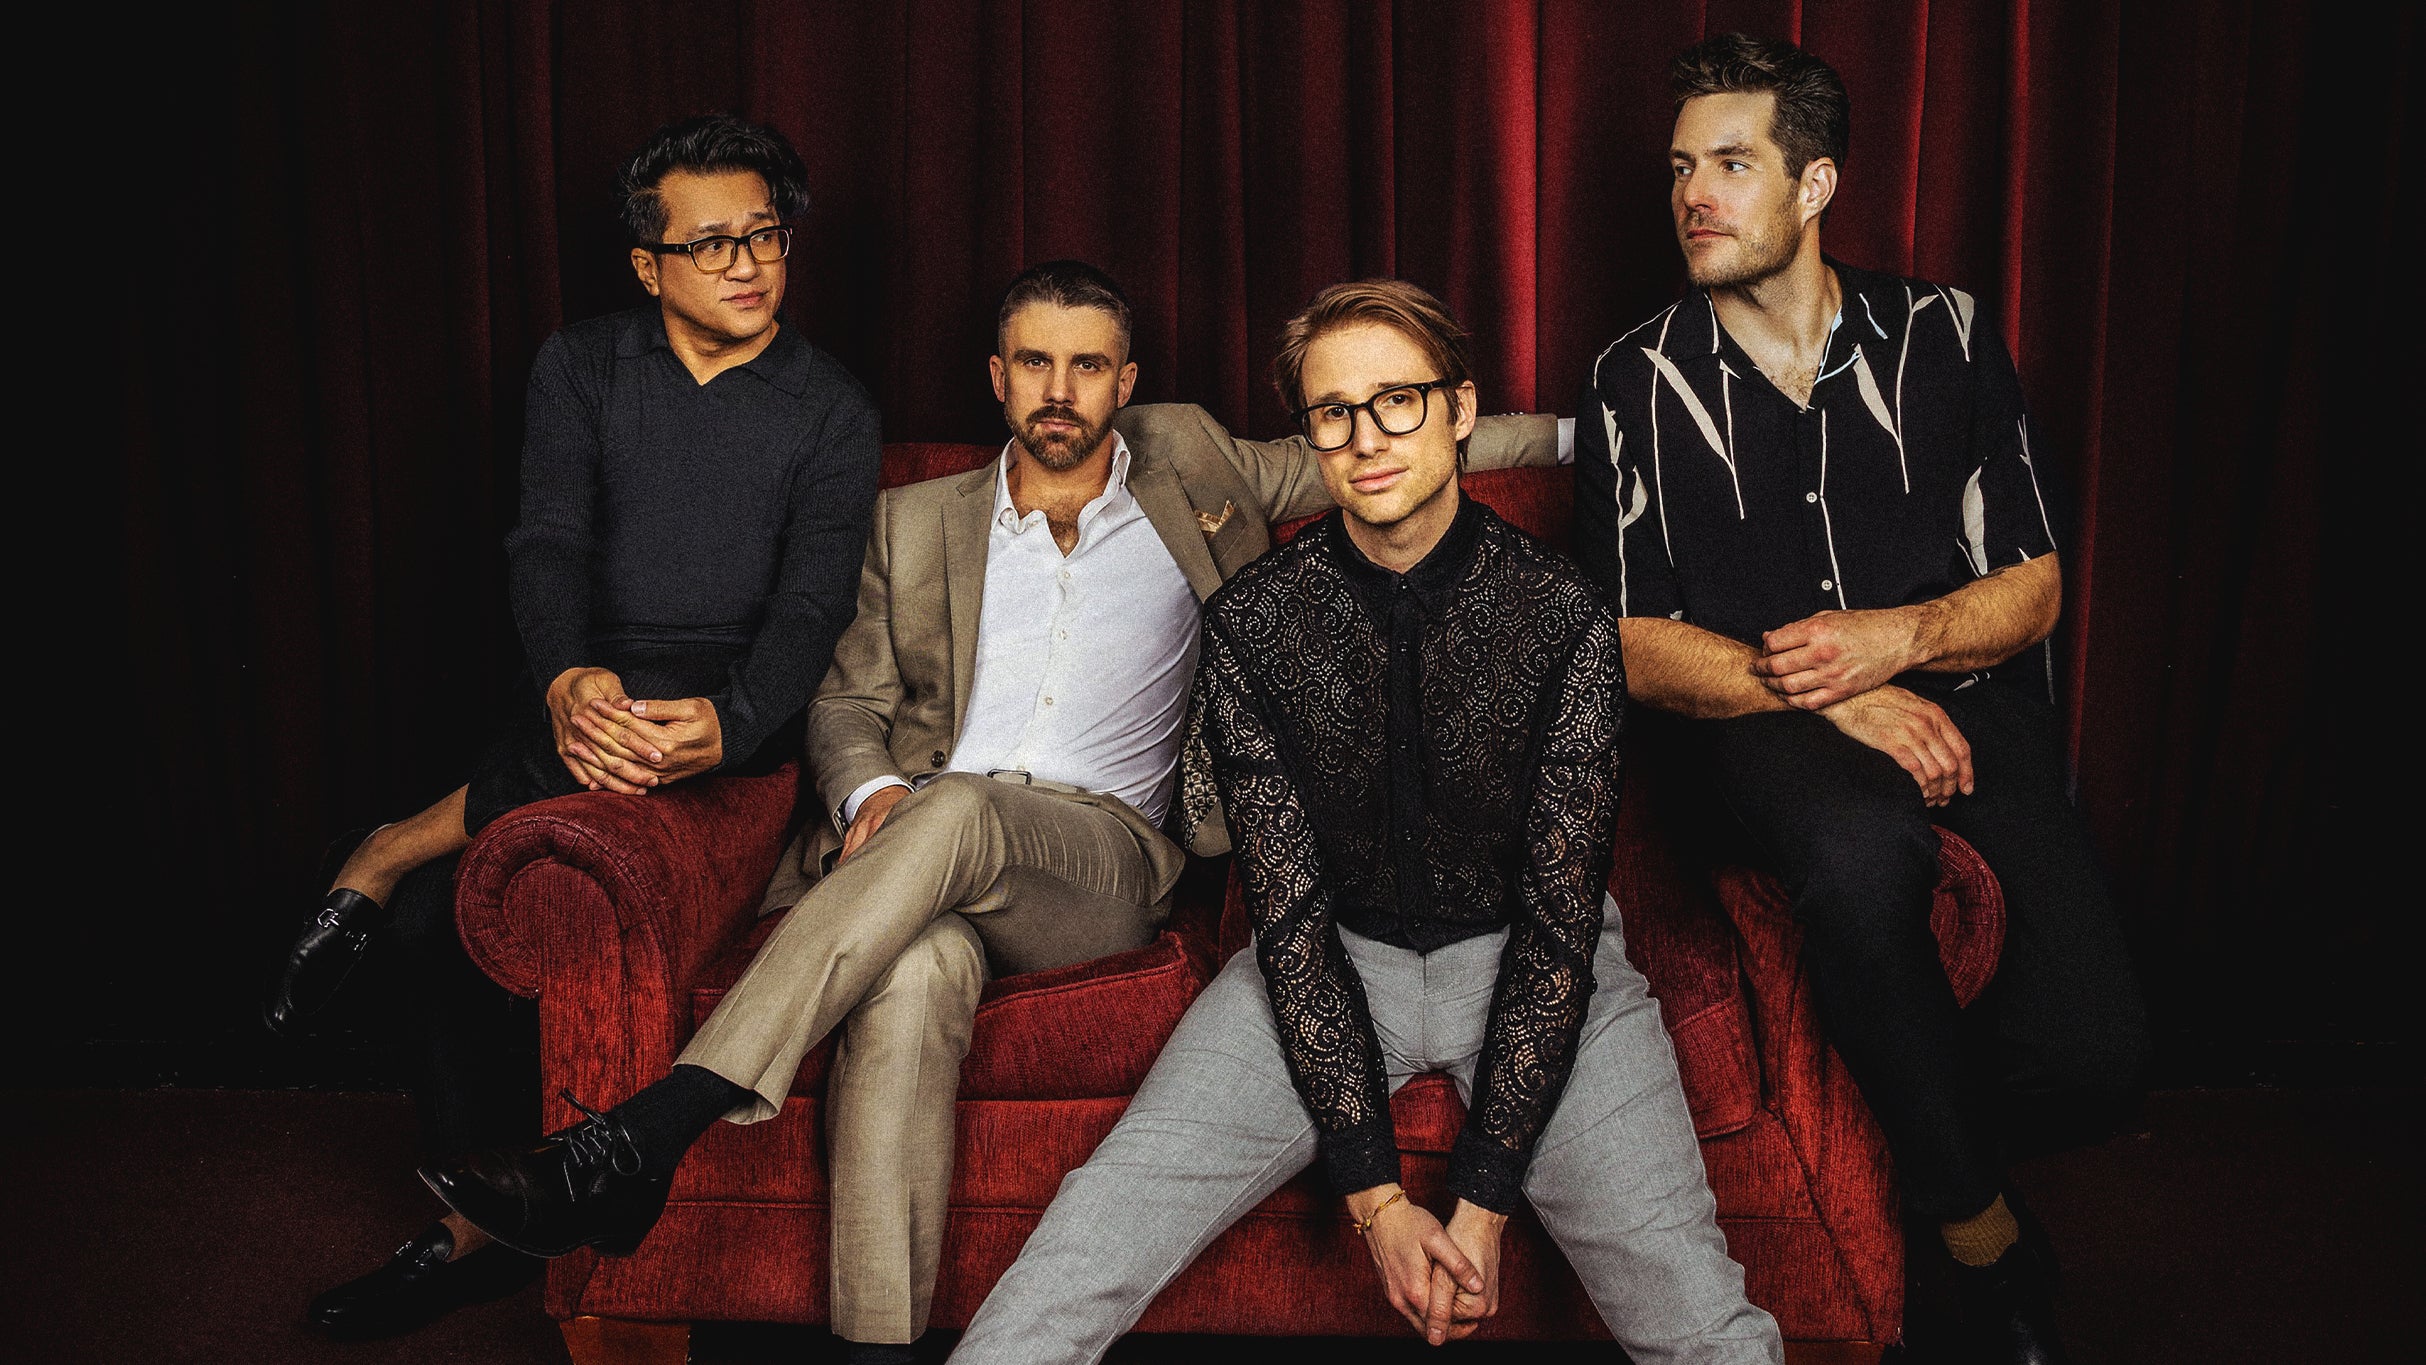 Saint Motel in London promo photo for Priority from O2 presale offer code